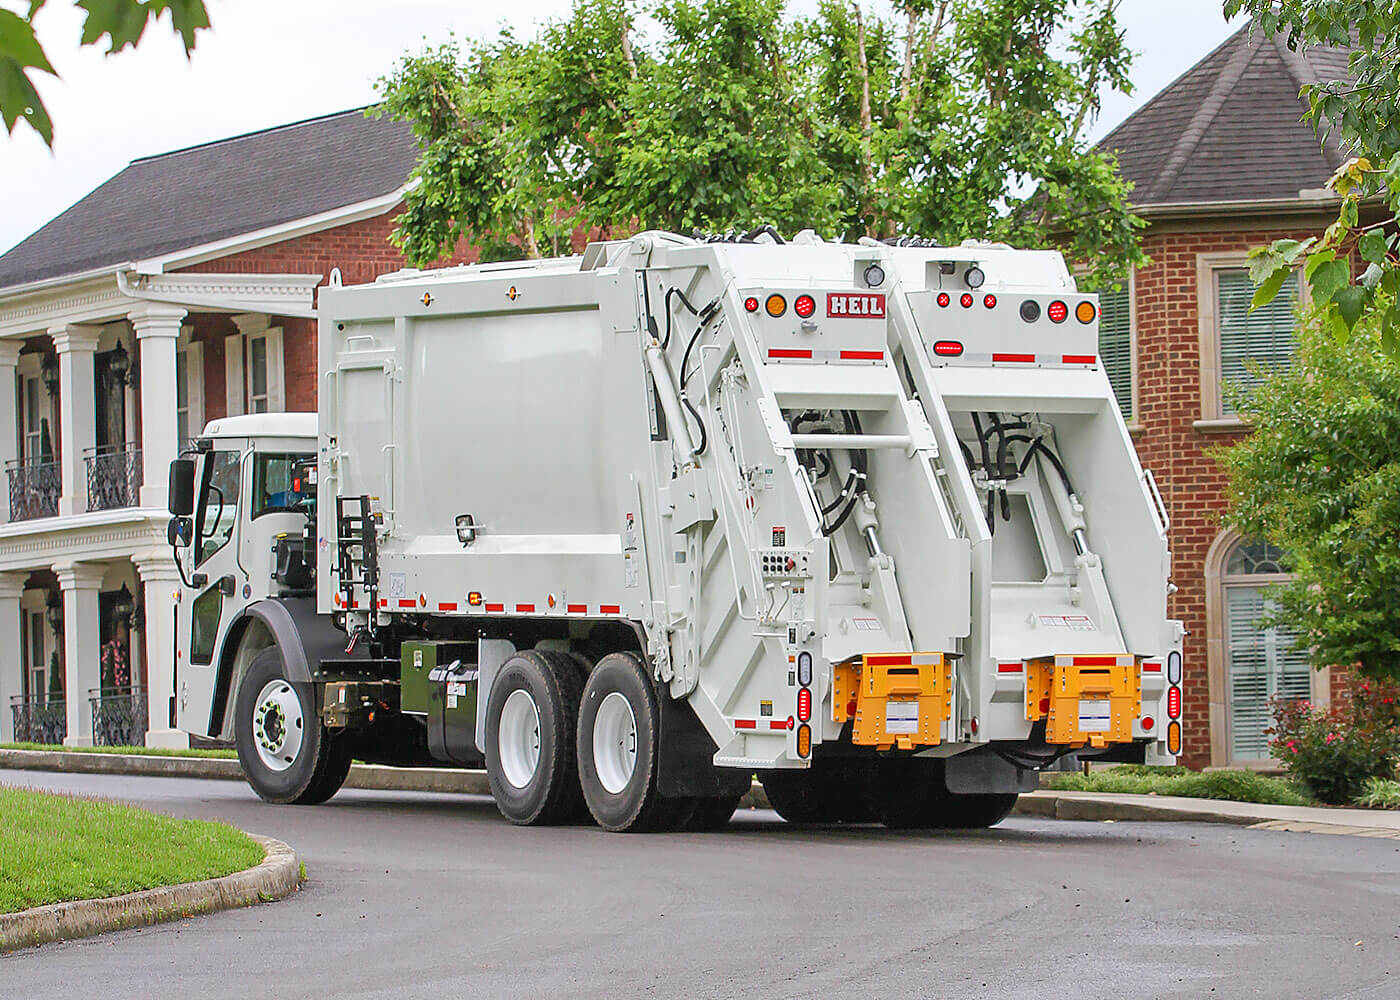 Garbage trucks with two compartments for recycling and trash pickup